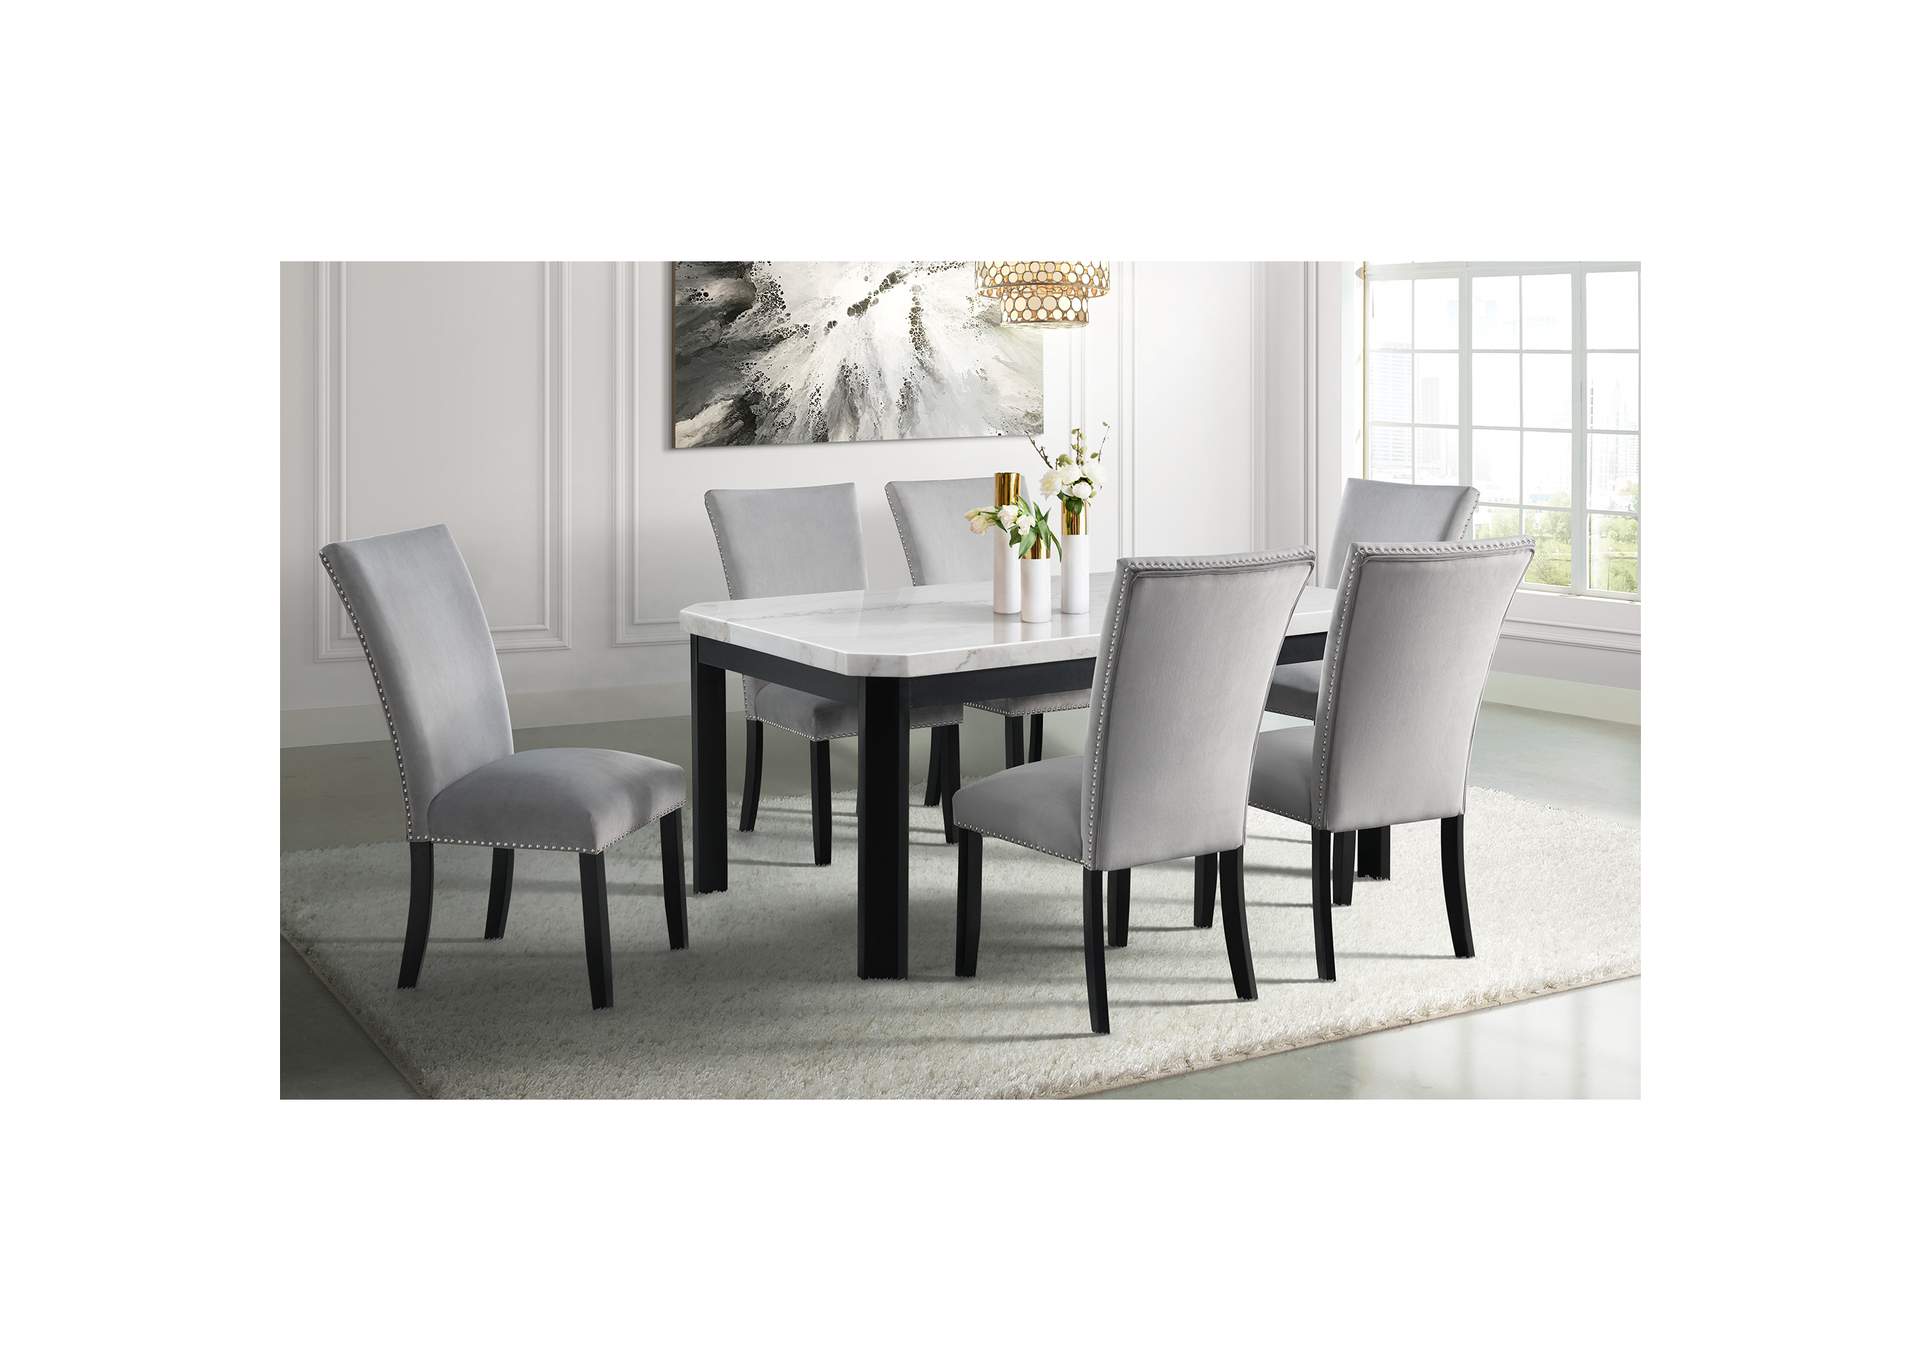 Francesca White Standard Height Dining Table,Elements